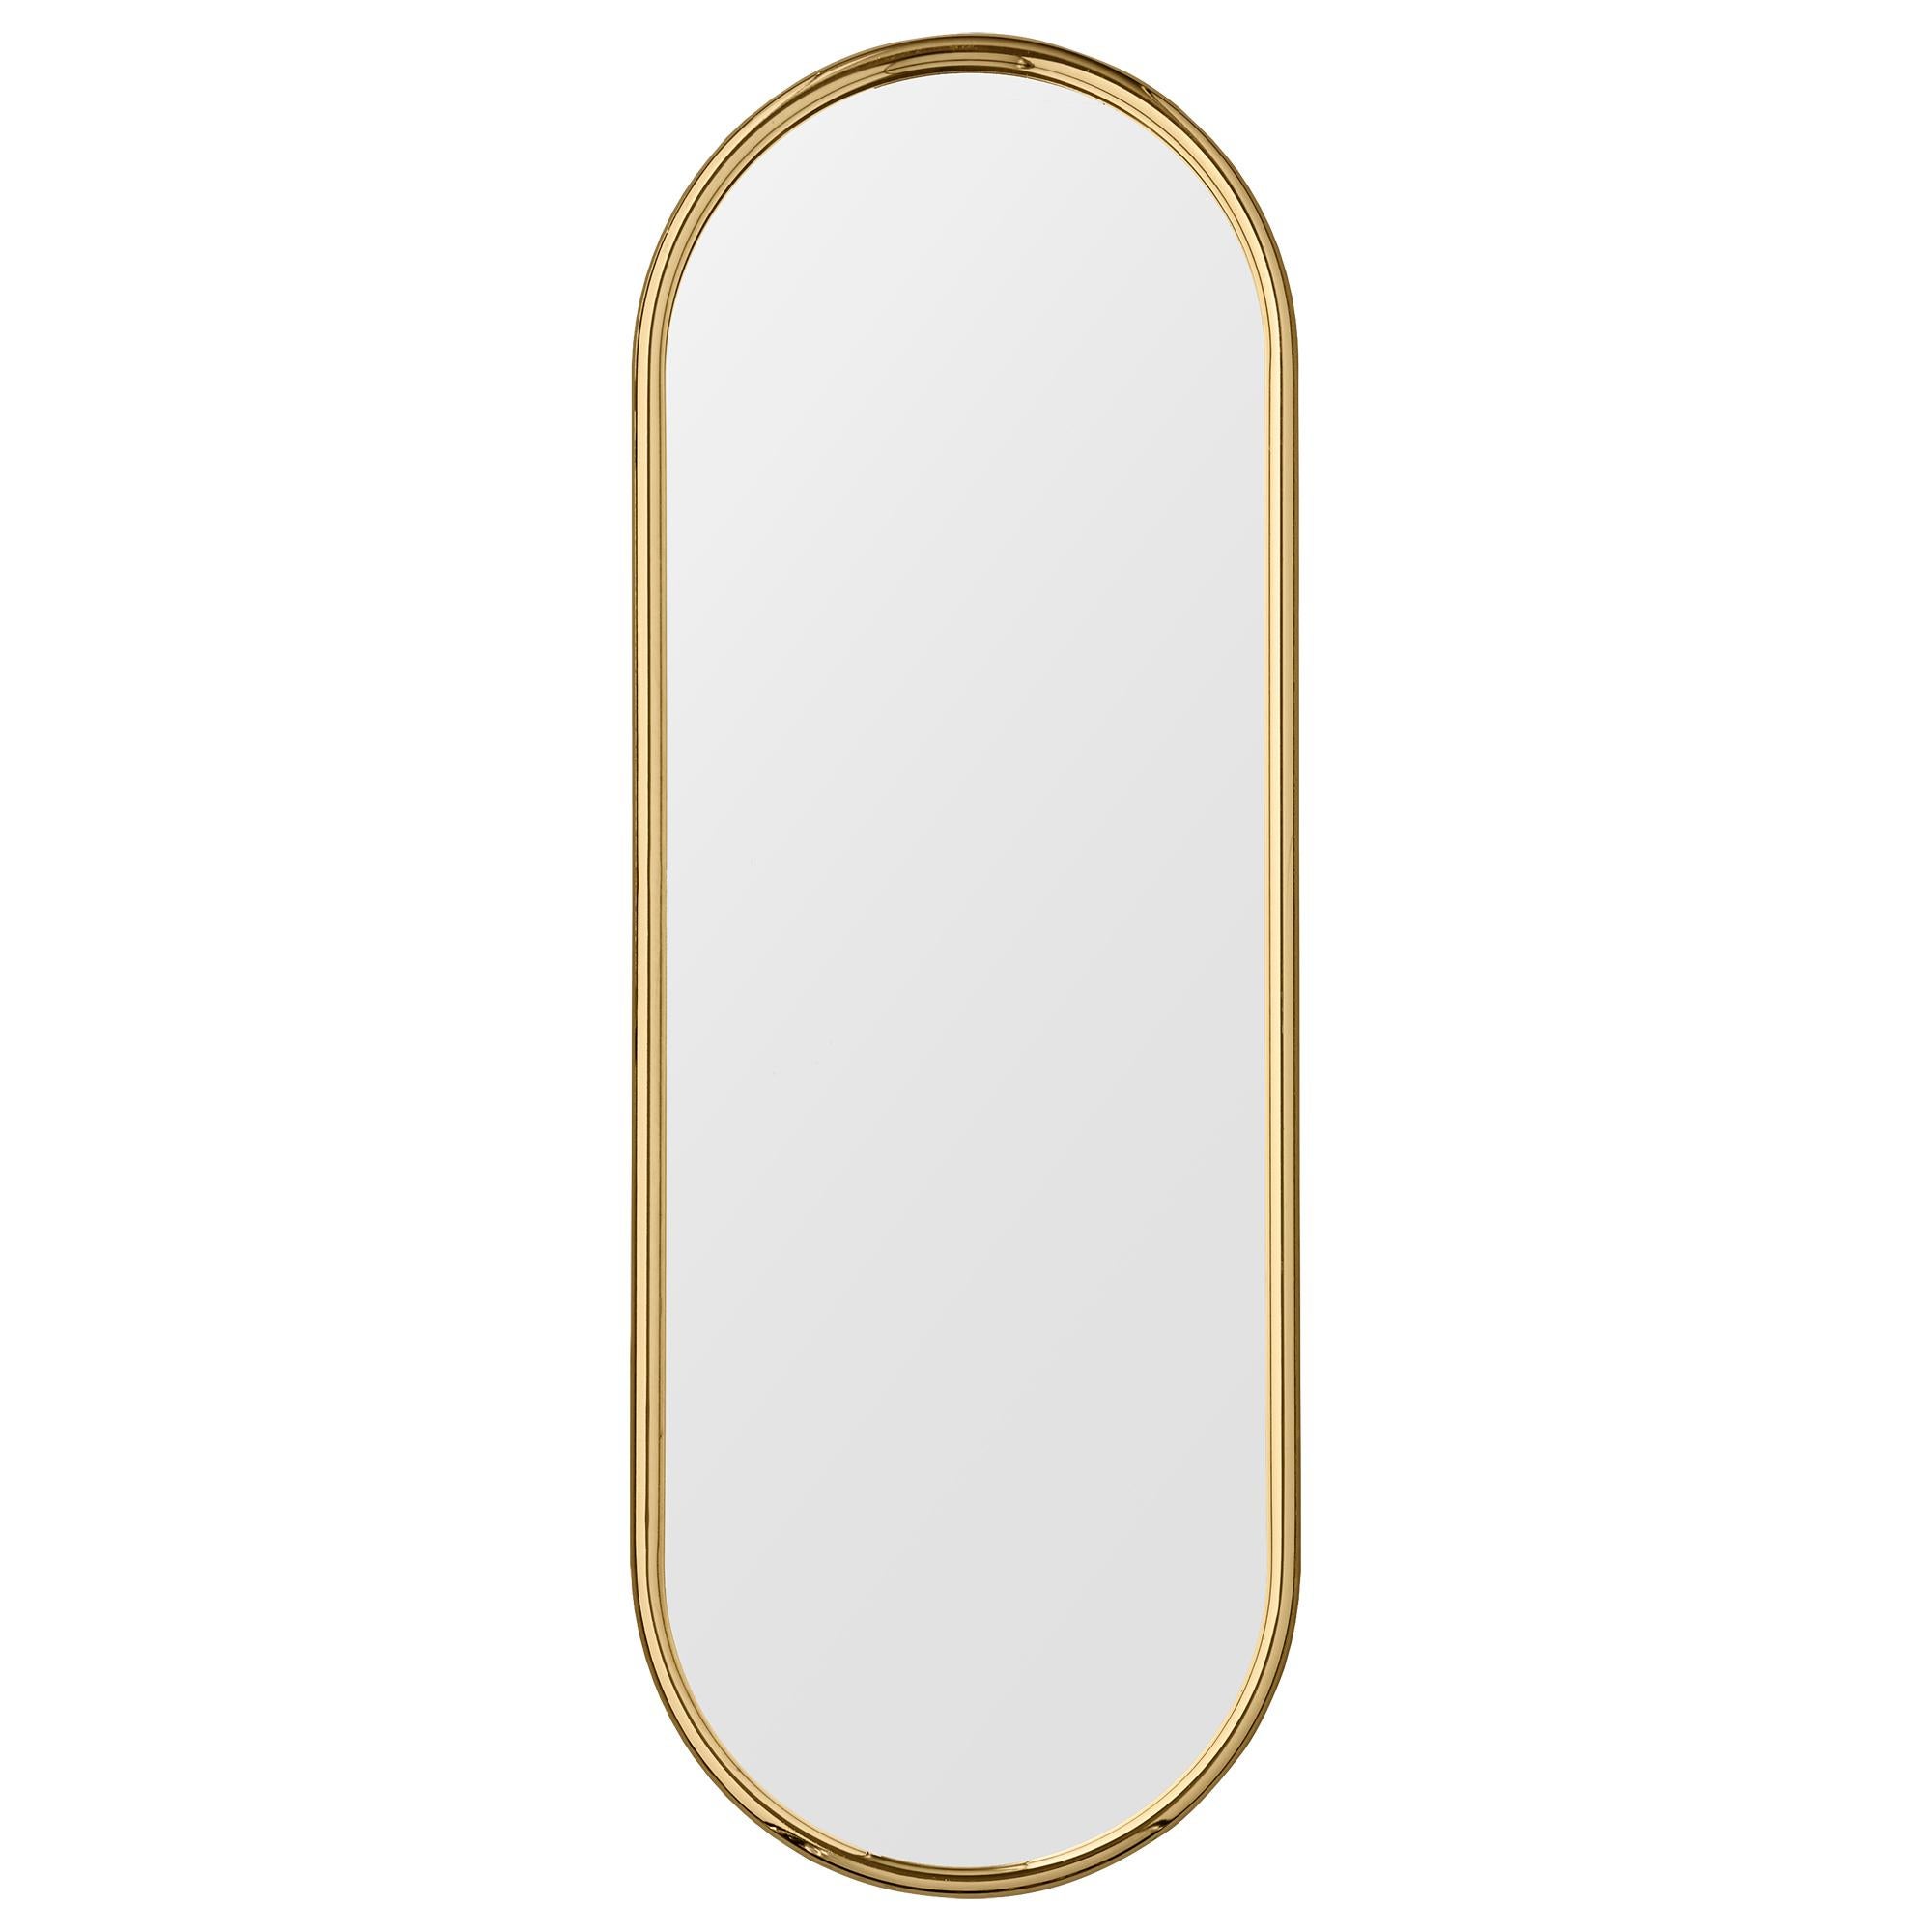 Angui golden oval large mirror by AYTM
Dimensions: 39 x 2 x 108 cm
Materials: Glass, copper, MDF

The Angui mirror with its simple pipe-styled frame is a beauty for any bathroom, hallway, or maybe bedroom. Use a single one or add several together.